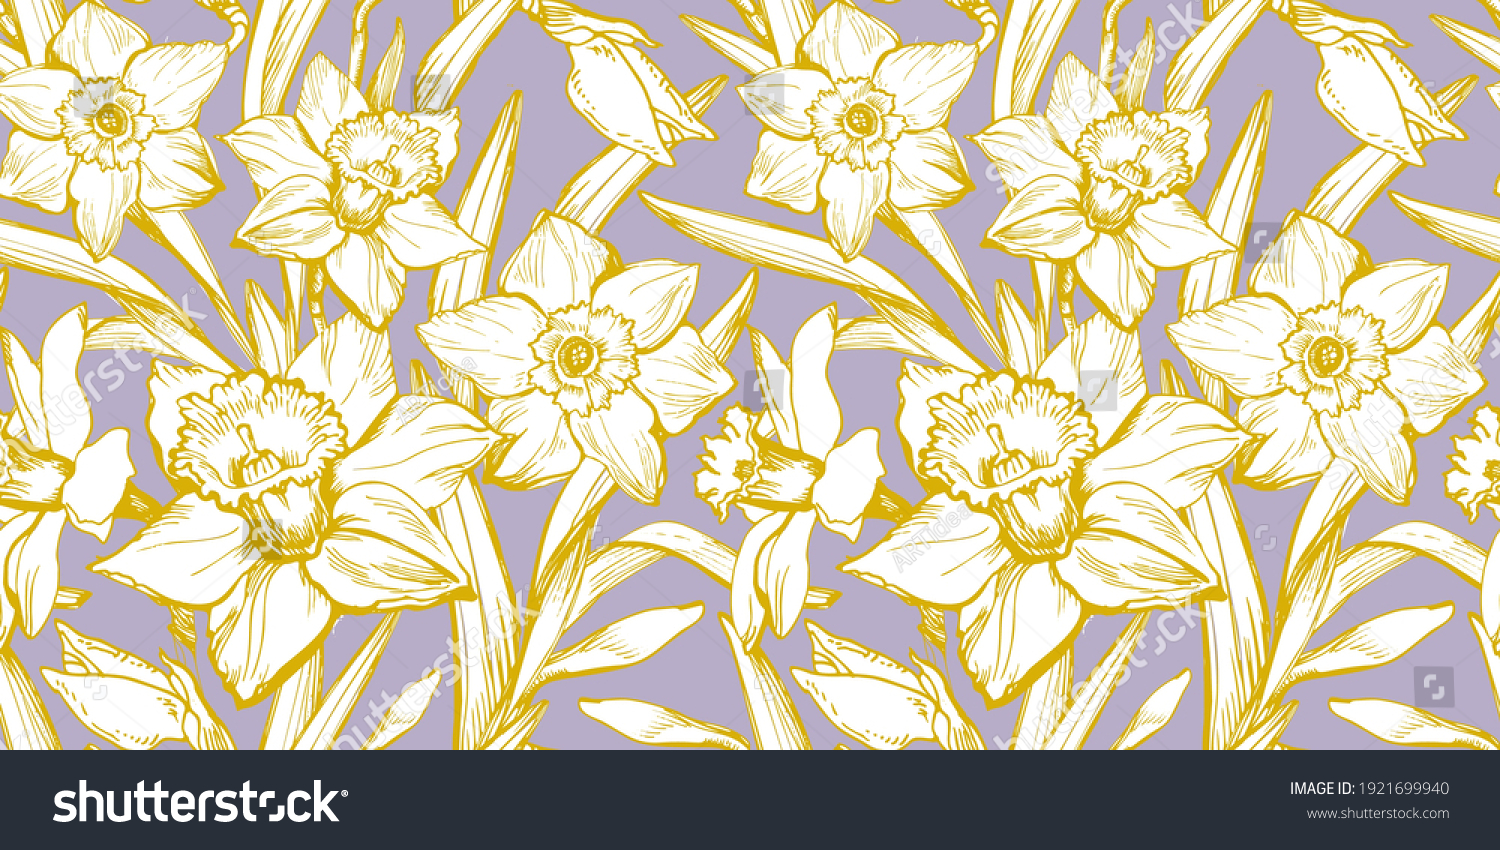 SVG of Yellow Illuminating hand drawn white silhouettes of flowers Narcissus and leaves on pastel background. Floral trendy seamless pattern with daffodil in full bloom for textile, wallpaper, bedding. svg